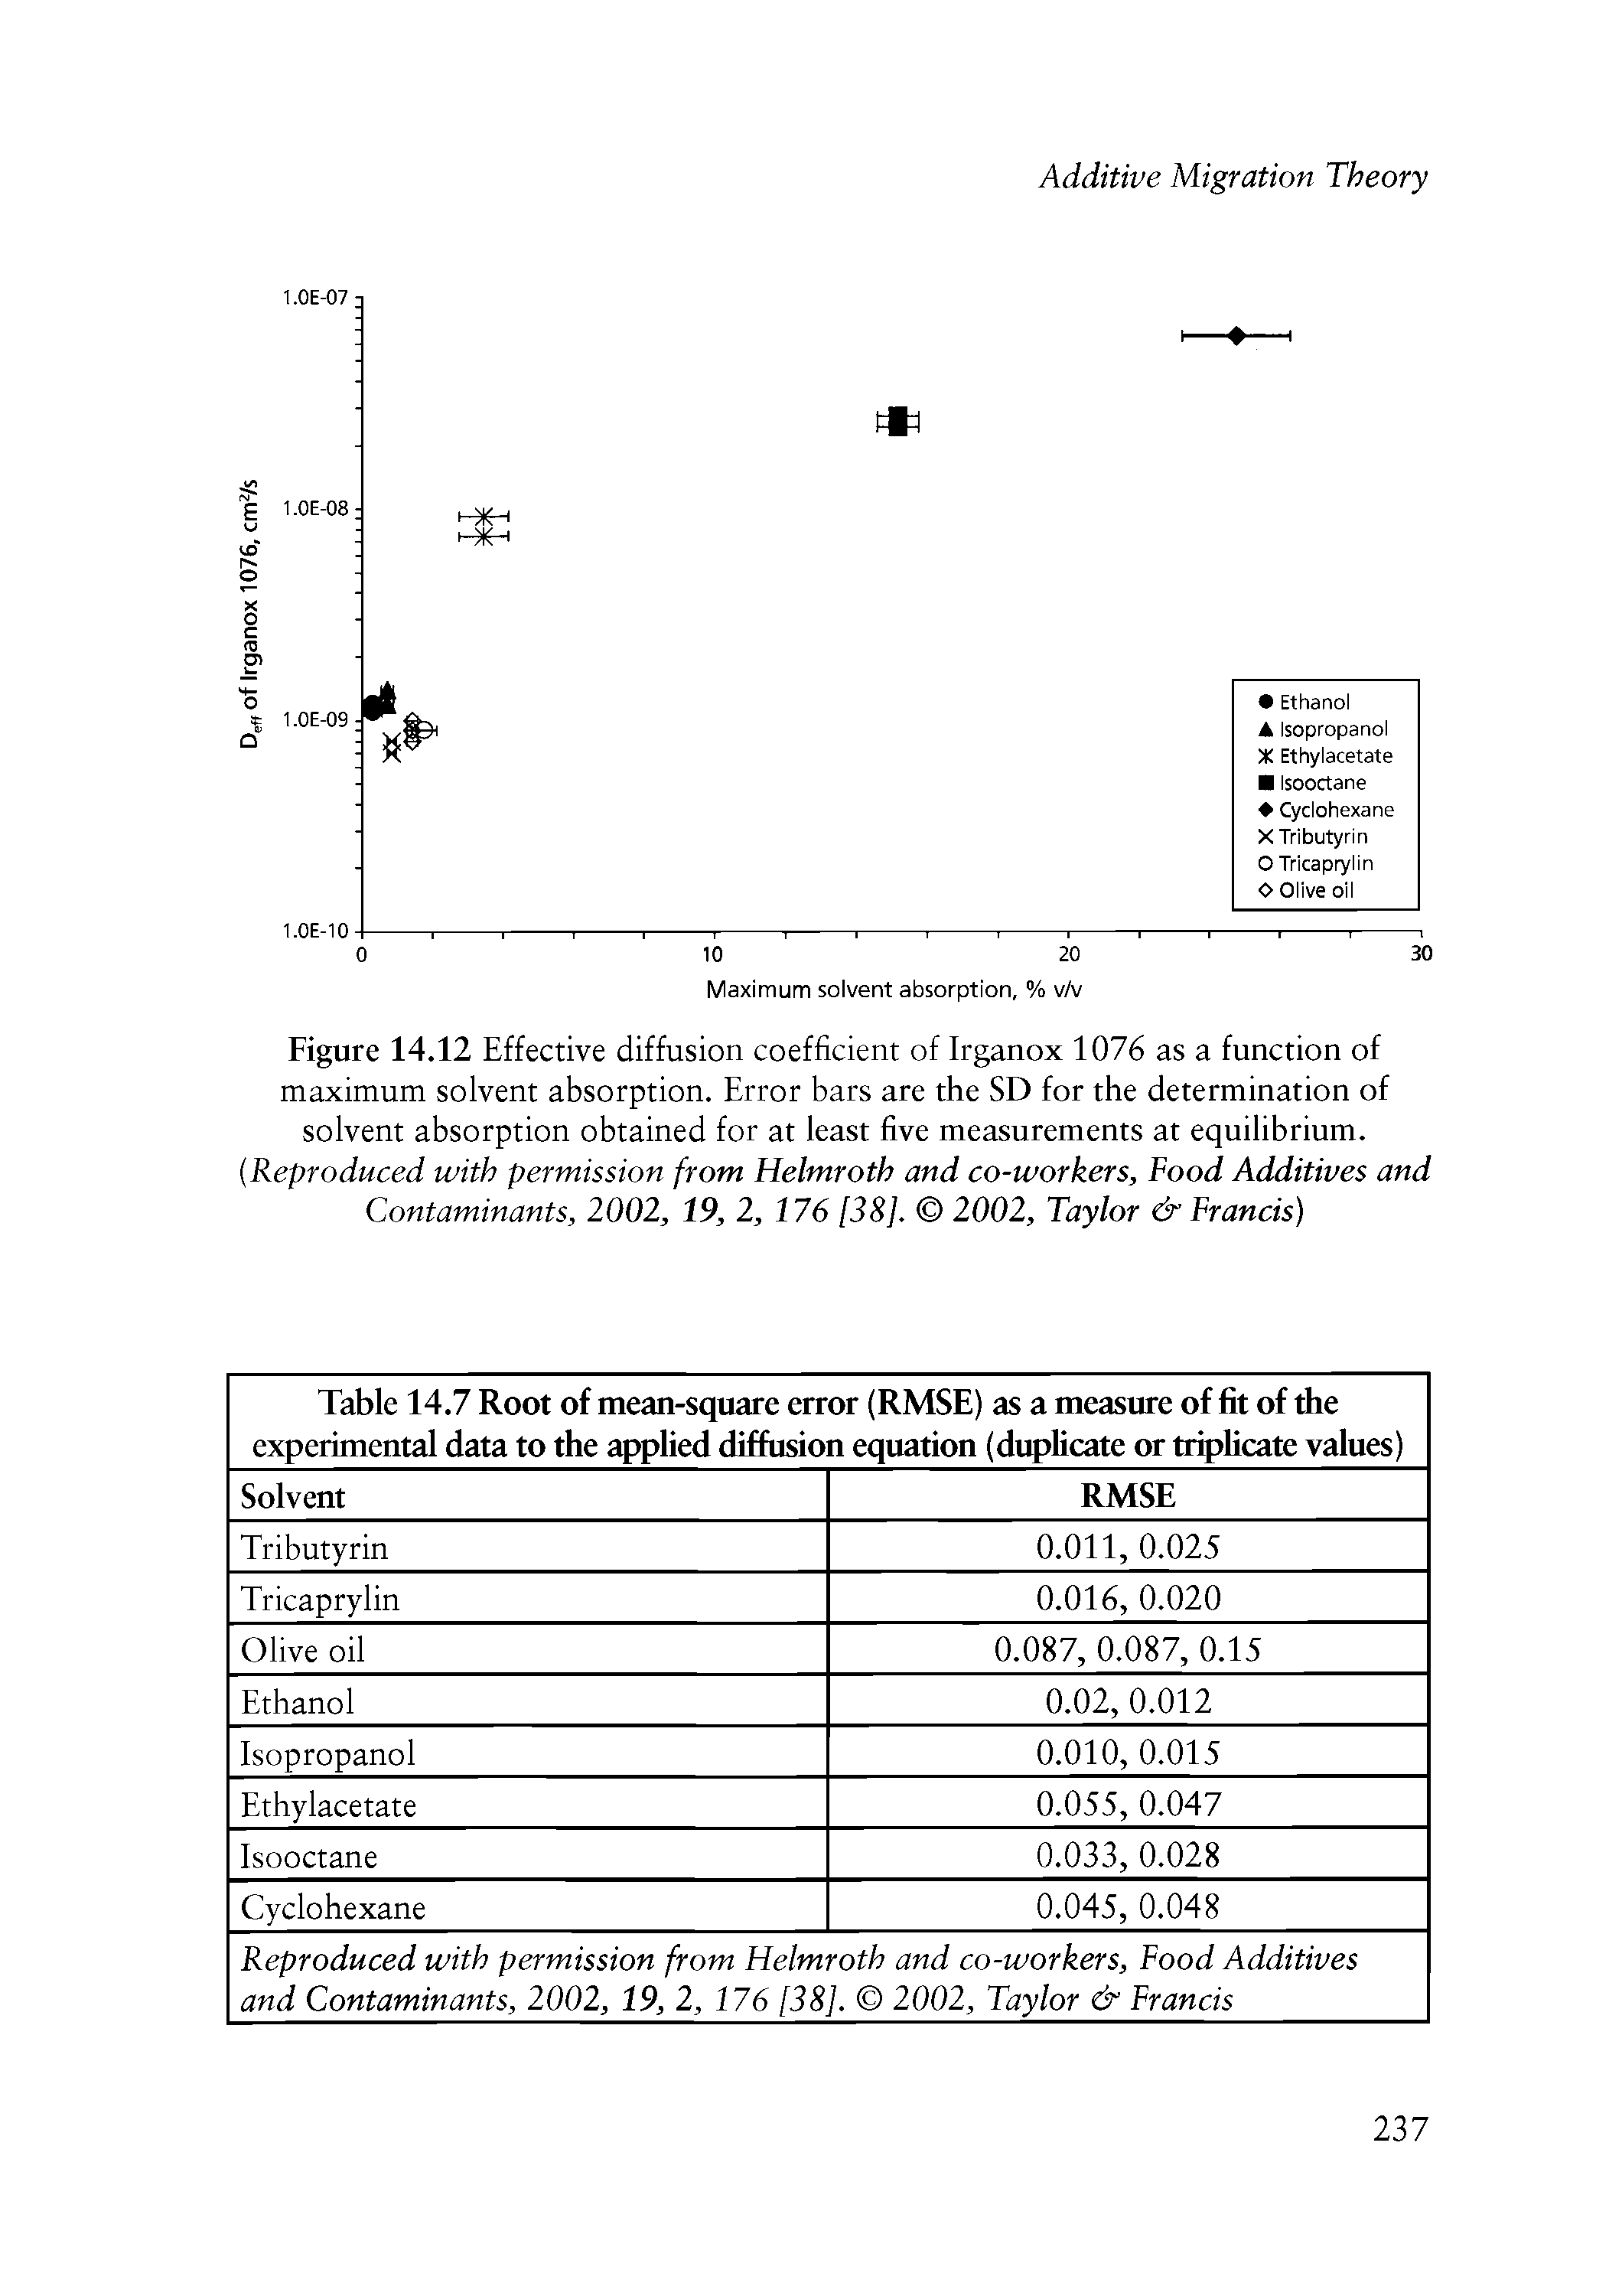 Figure 14.12 Effective diffusion coefficient of Irganox 1076 as a function of maximum solvent absorption. Error bars are the SD for the determination of solvent absorption obtained for at least five measurements at equilibrium. Reproduced with permission from Helmroth and co-workers. Food Additives and Contaminants, 2002, 19, 2, 176 [38], 2002, Taylor Francis)...